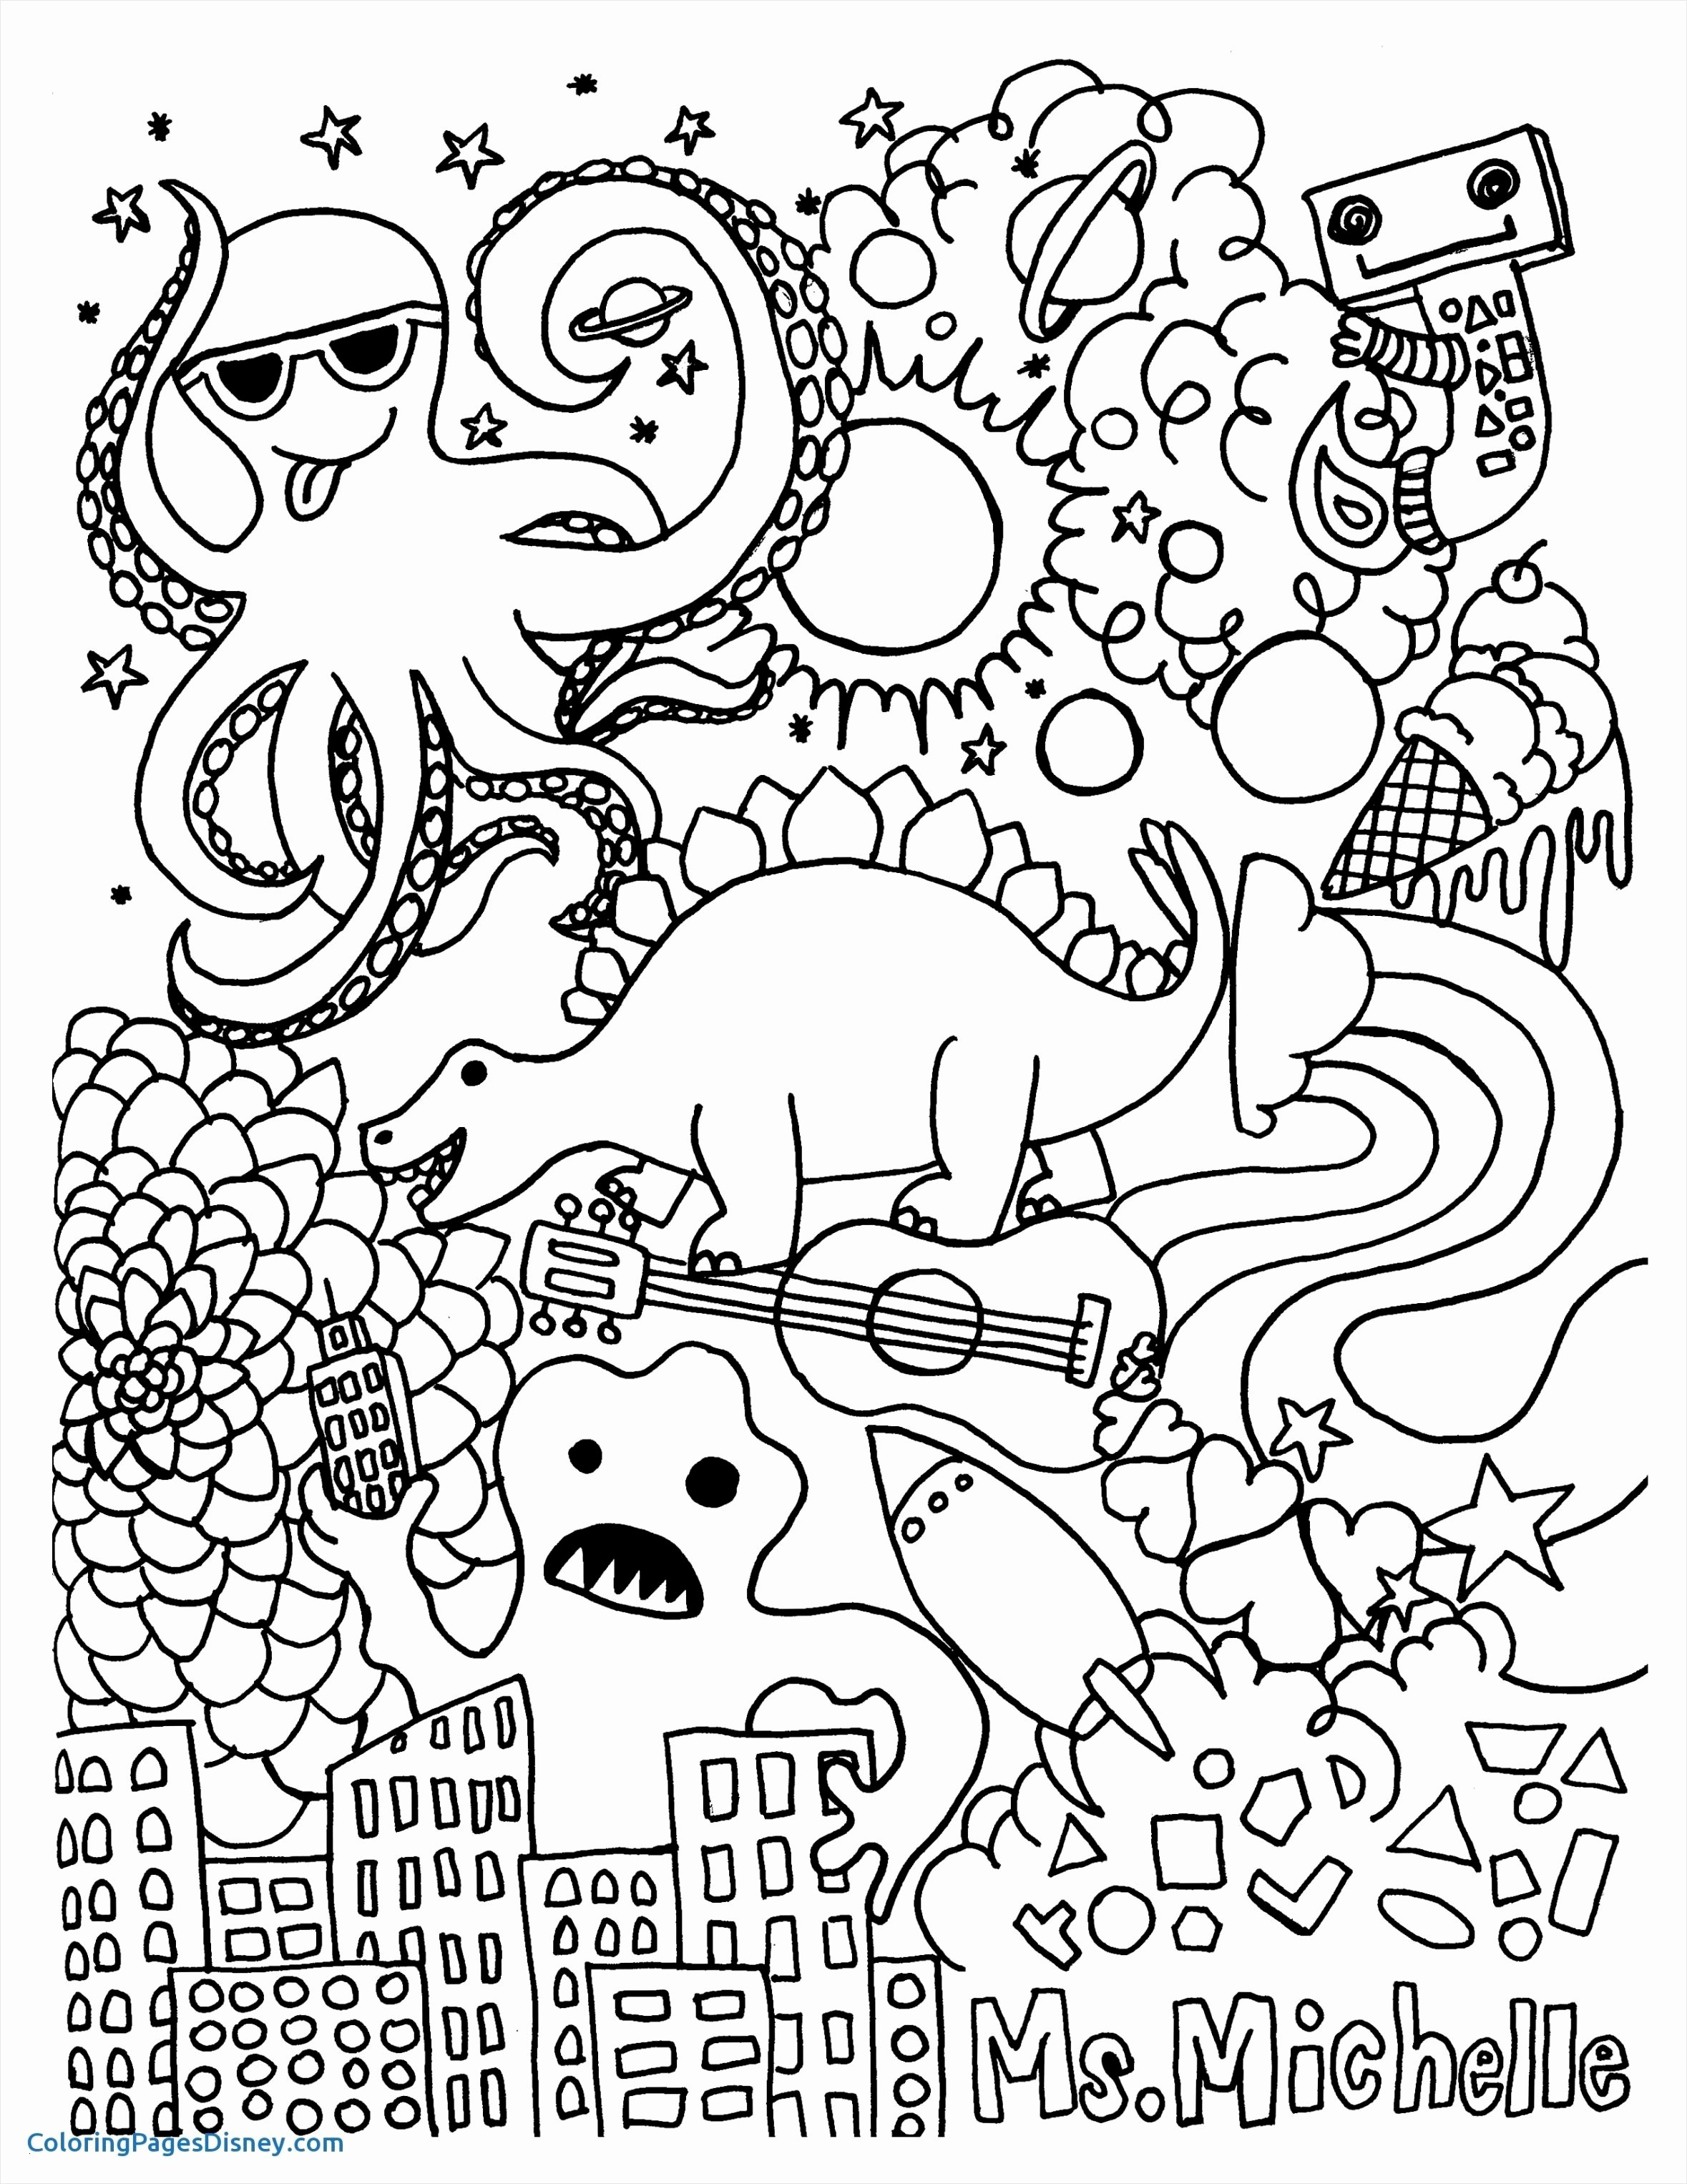 Summer Safety Coloring Pages Trick Or Treat Safety Coloring Page Beautiful Donald Trump Coloring